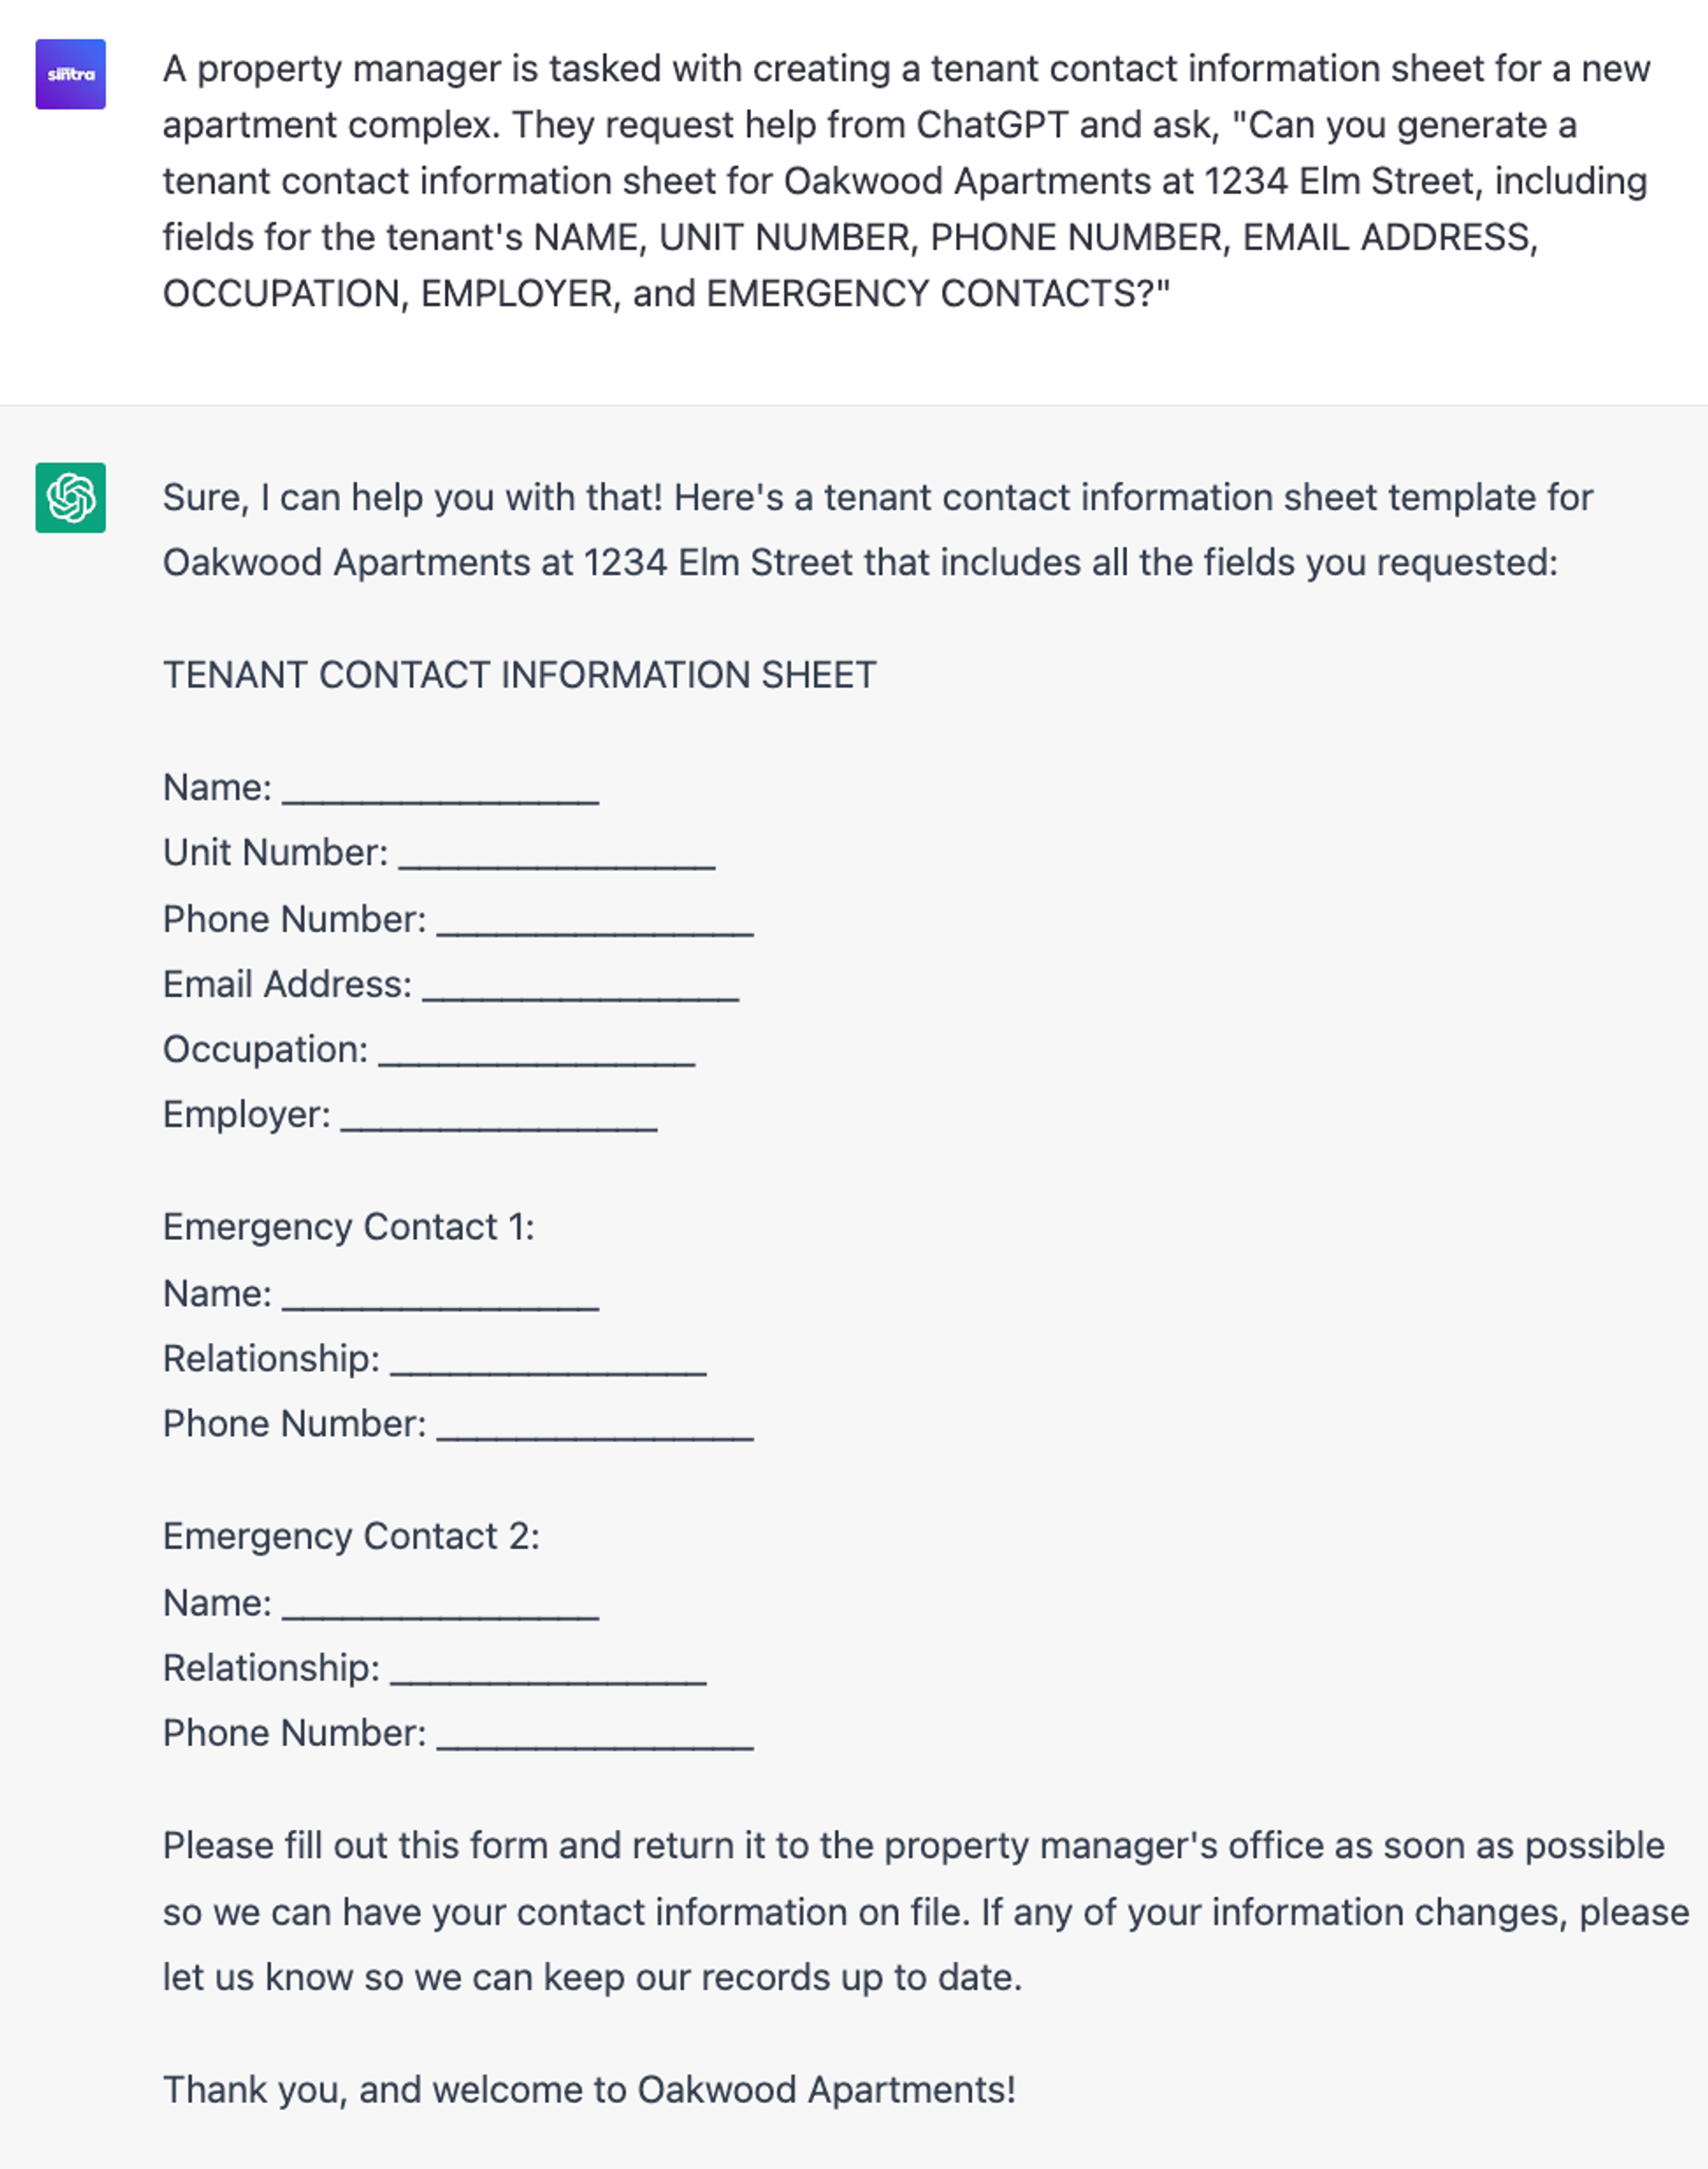  6 Expert ChatGPT Prompts: Writing tenant contact information sheets